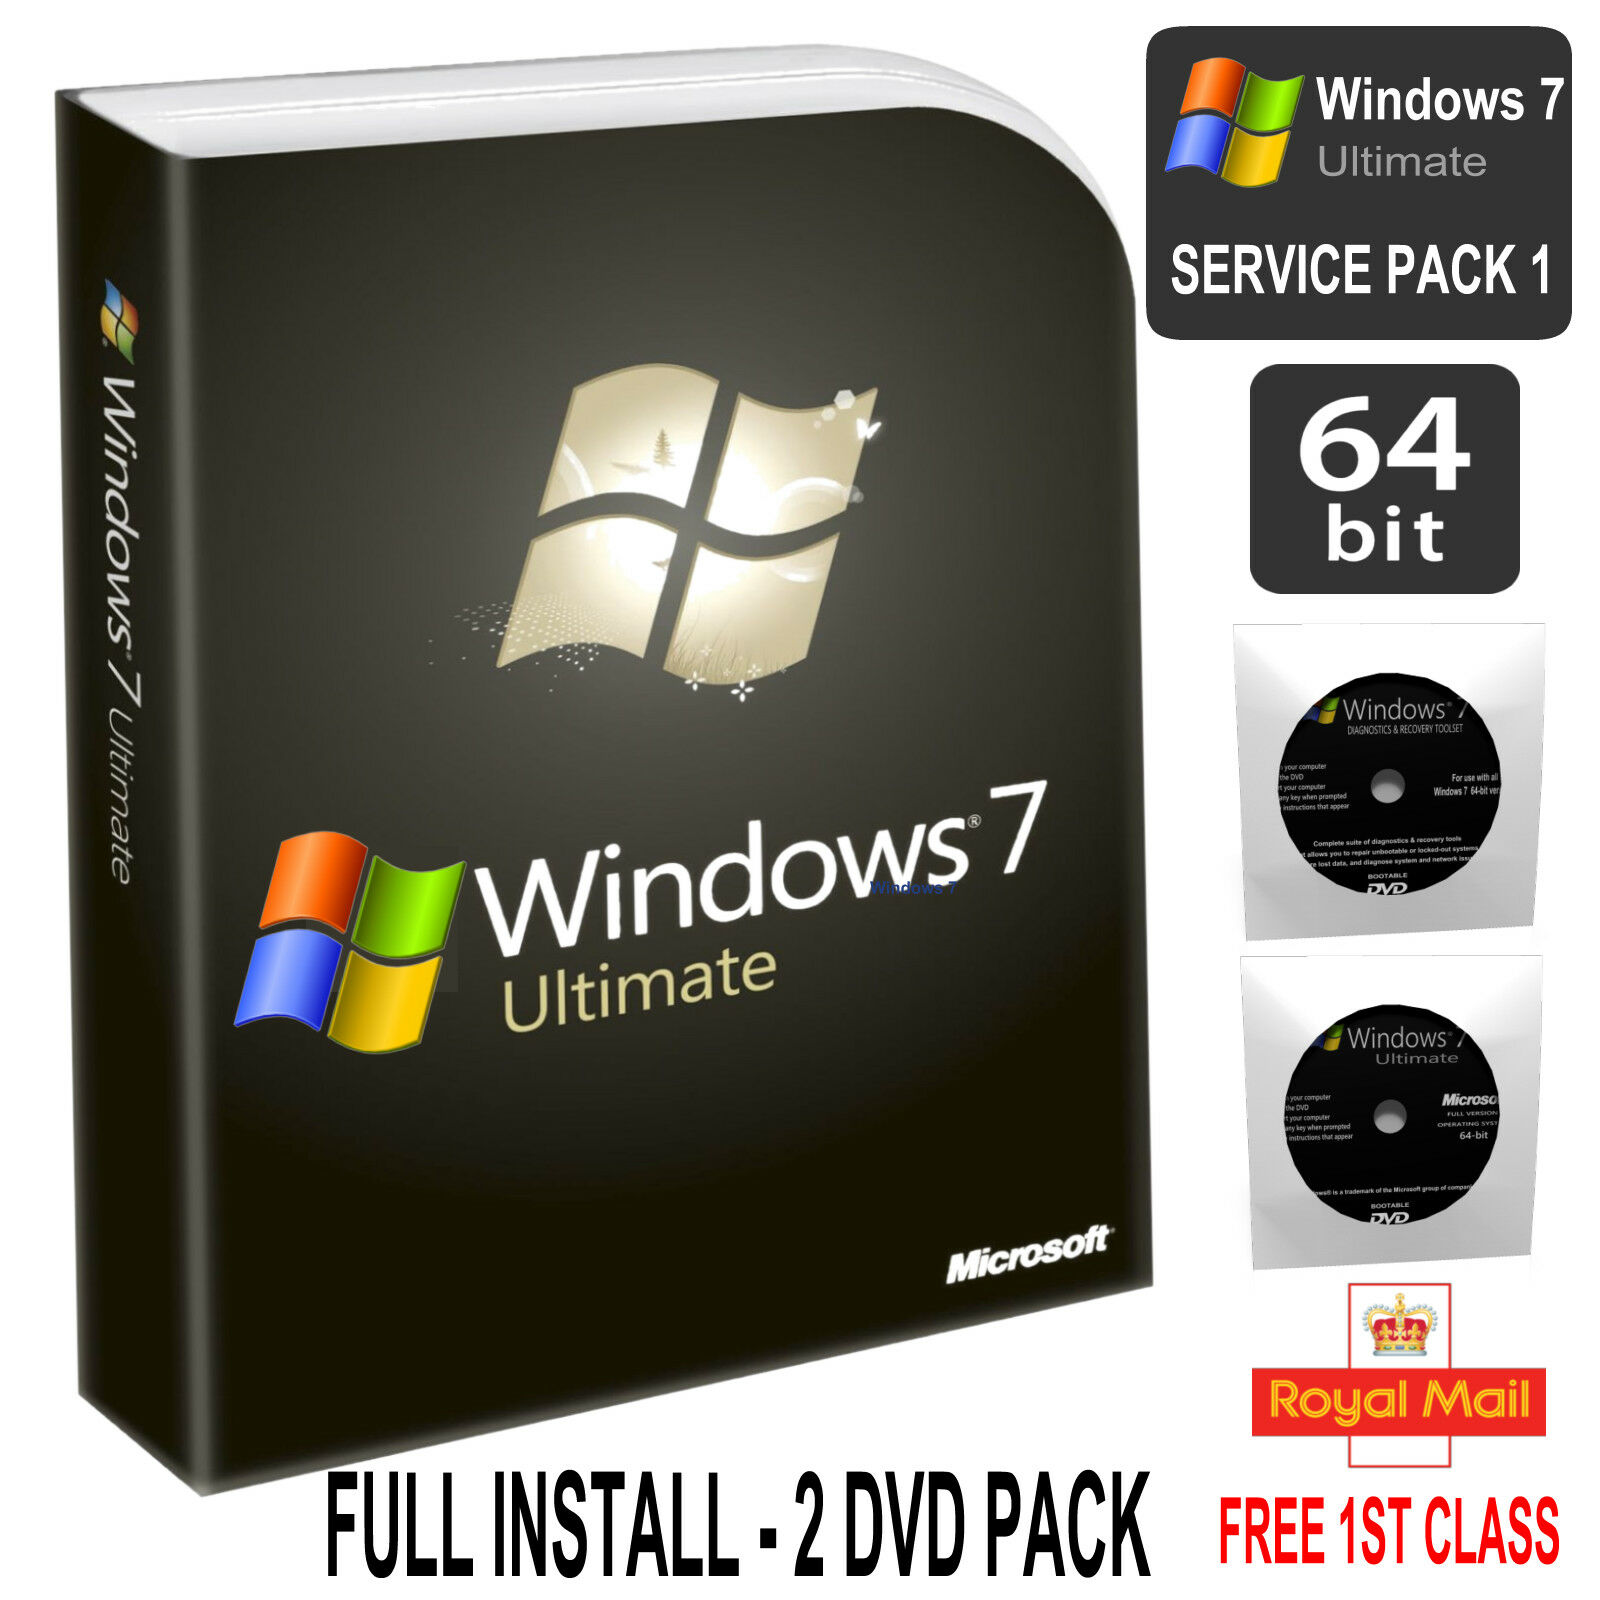 How to install windows 7 service pack 1